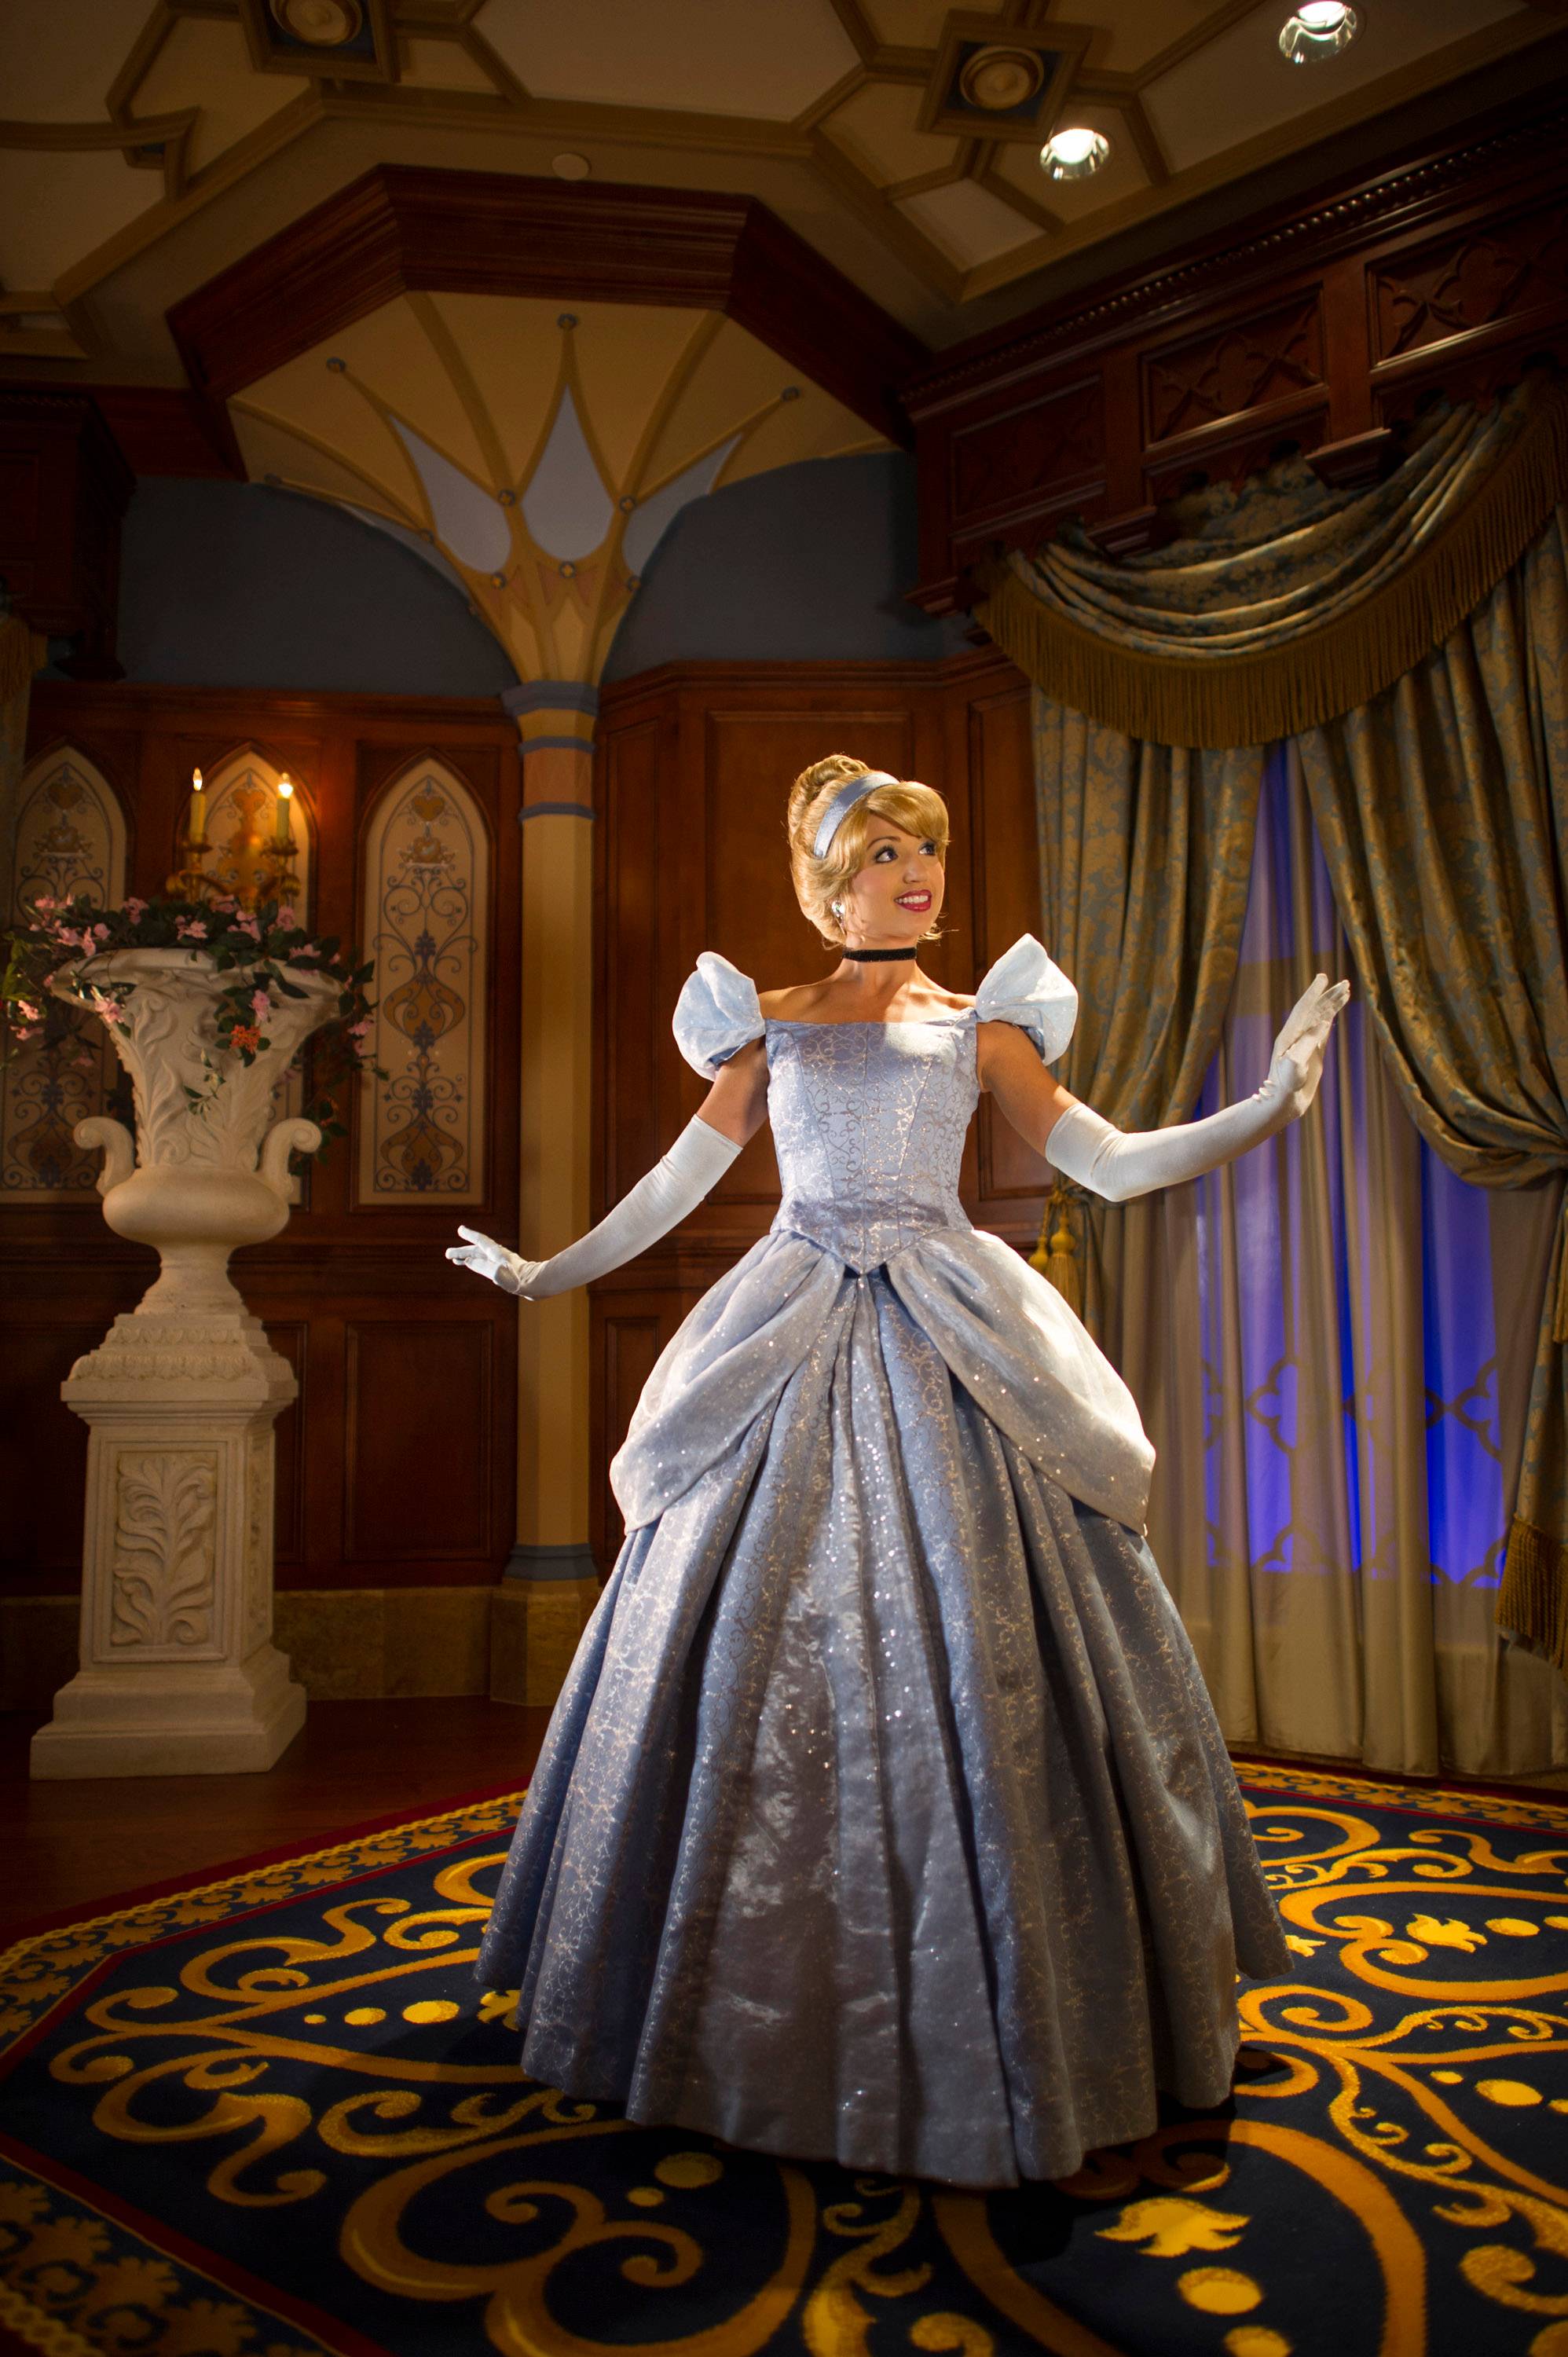 New Princess Fairytale Hall meet and greet now open at the Magic Kingdom